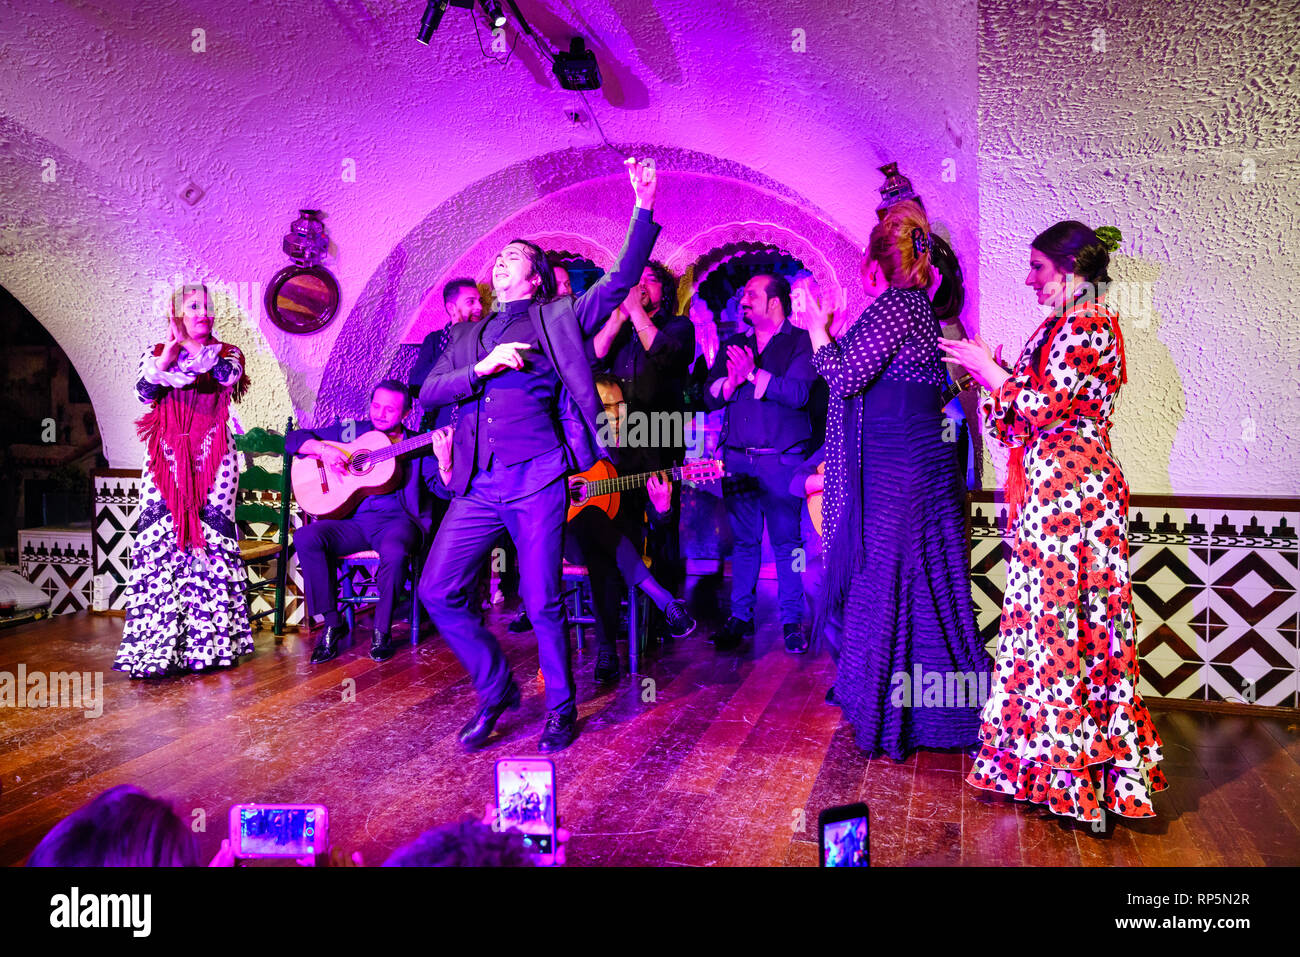 Barcelona, Spain, April 24, 2017: Traditional Flamenco performance at a club in Barcelona, Spain Stock Photo